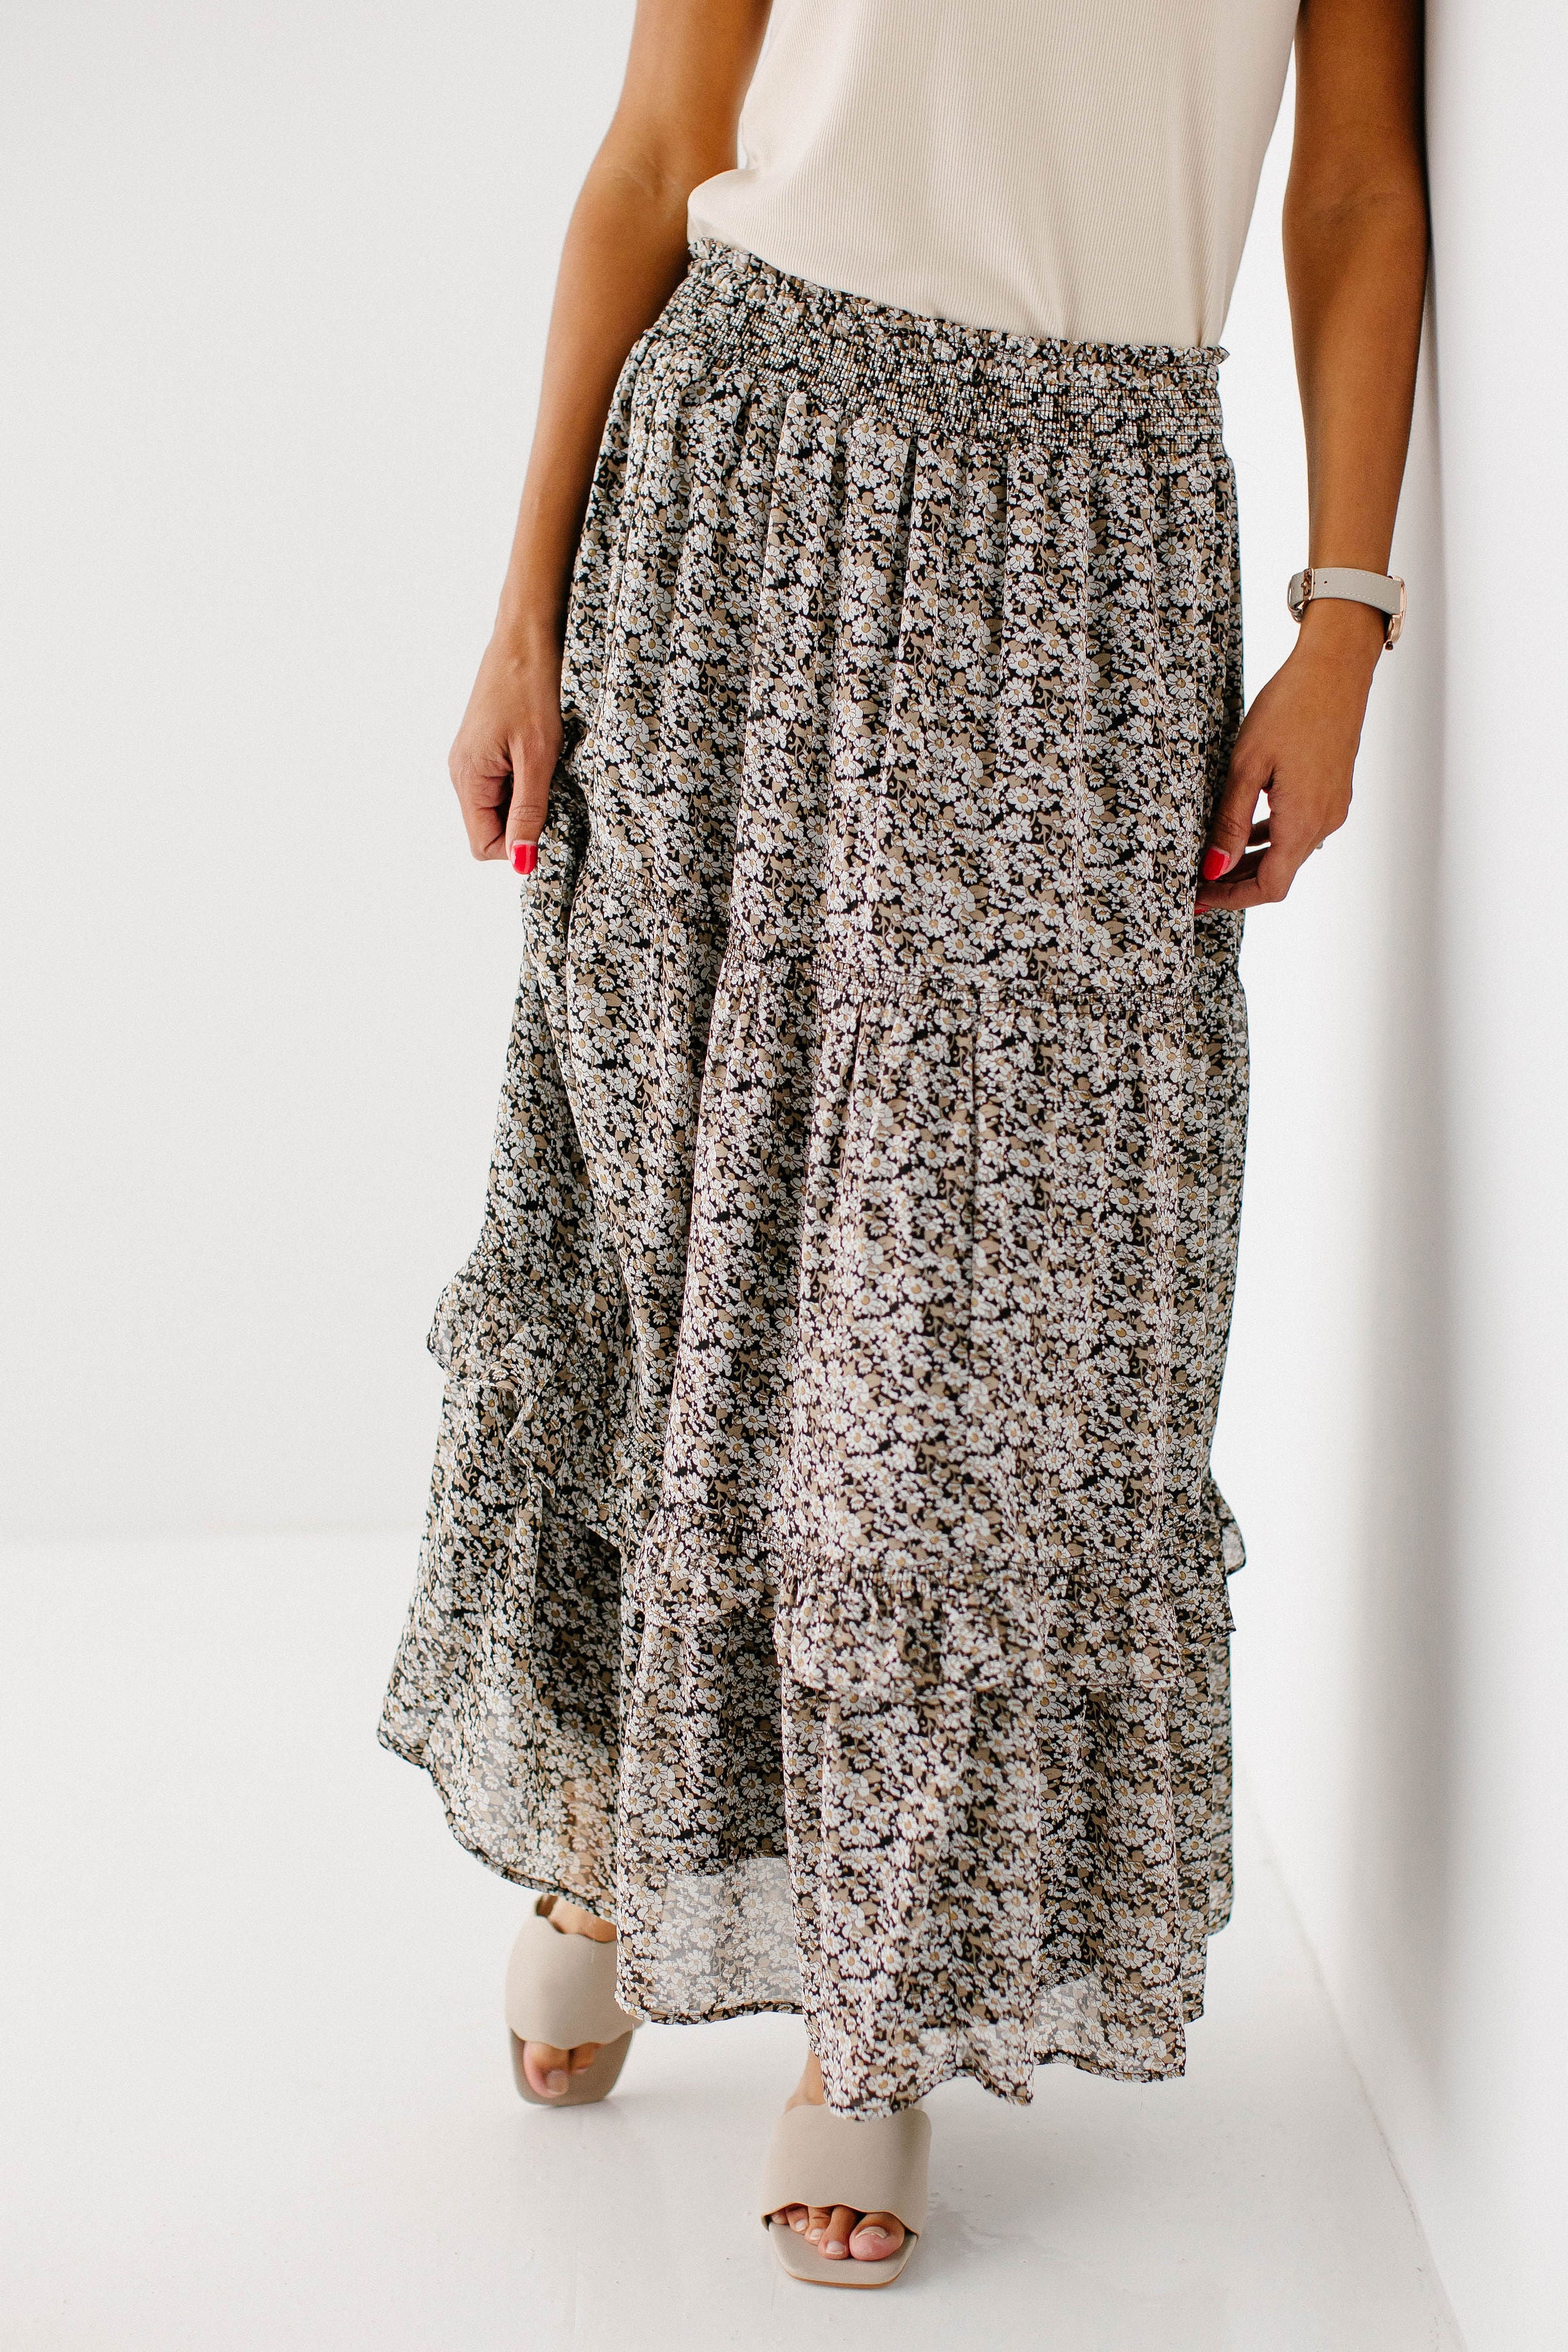 Modest Skirts | Modest Skirt Outfits | The Main Street Exchange – Page 2